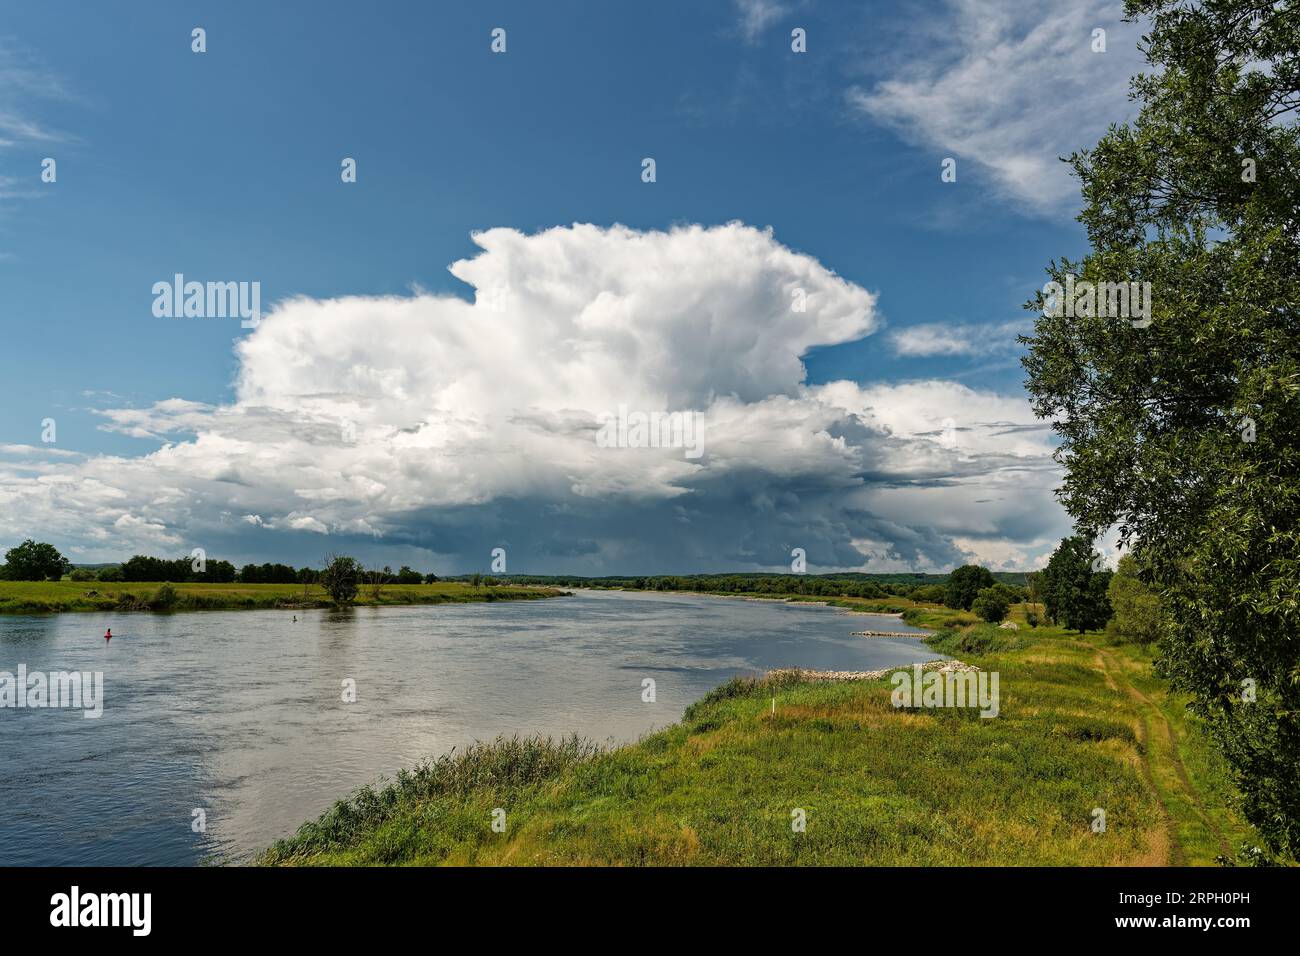 View along the German-Polish border river Oder to a big thunderstorm front, from which partly rain falls, sunny weather, green river bank with trees, Stock Photo